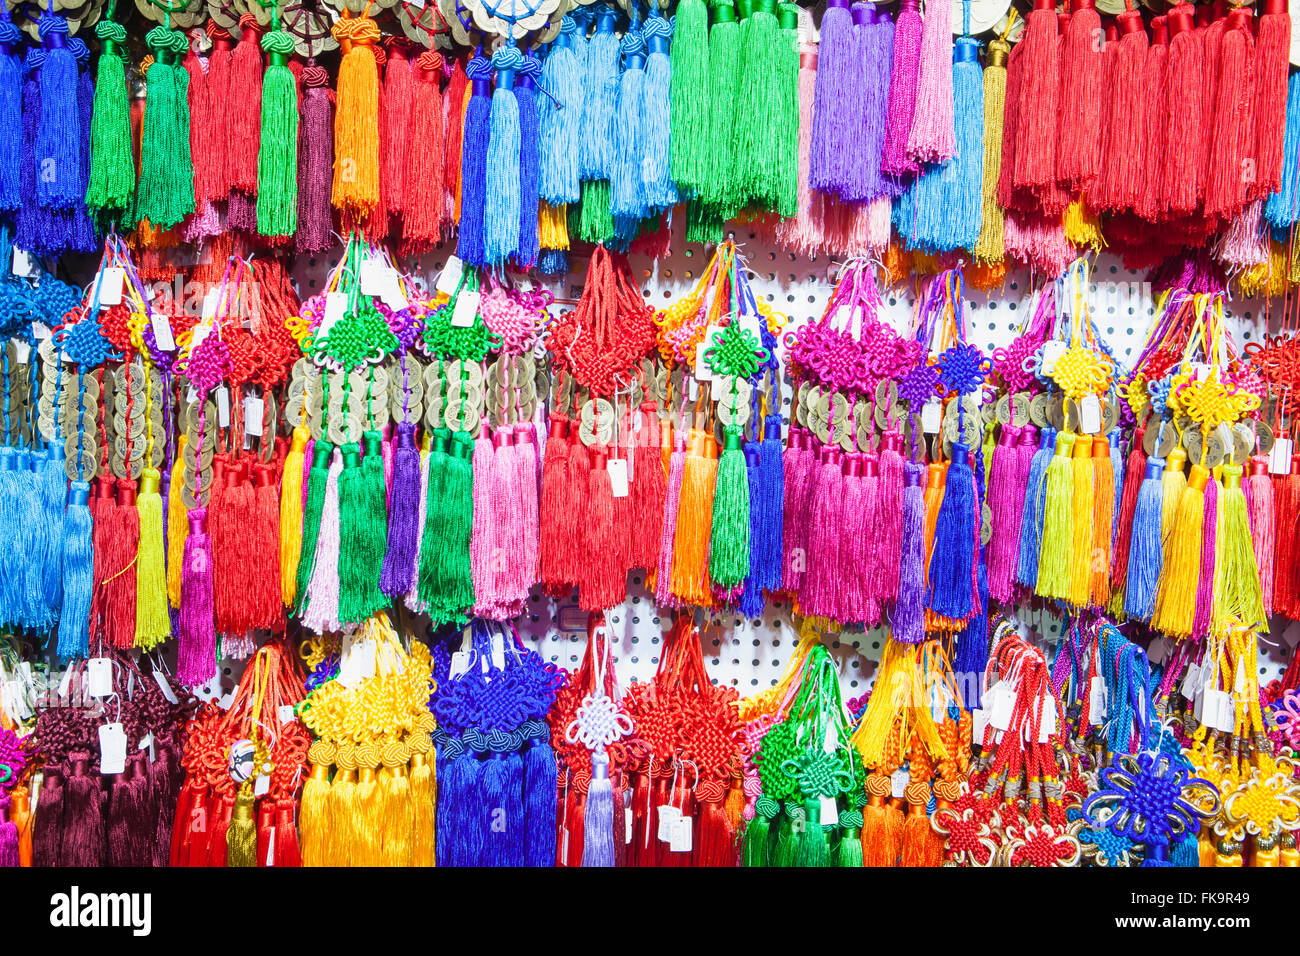 tassels hanging in a shopping mall, Beijing, China Stock Photo